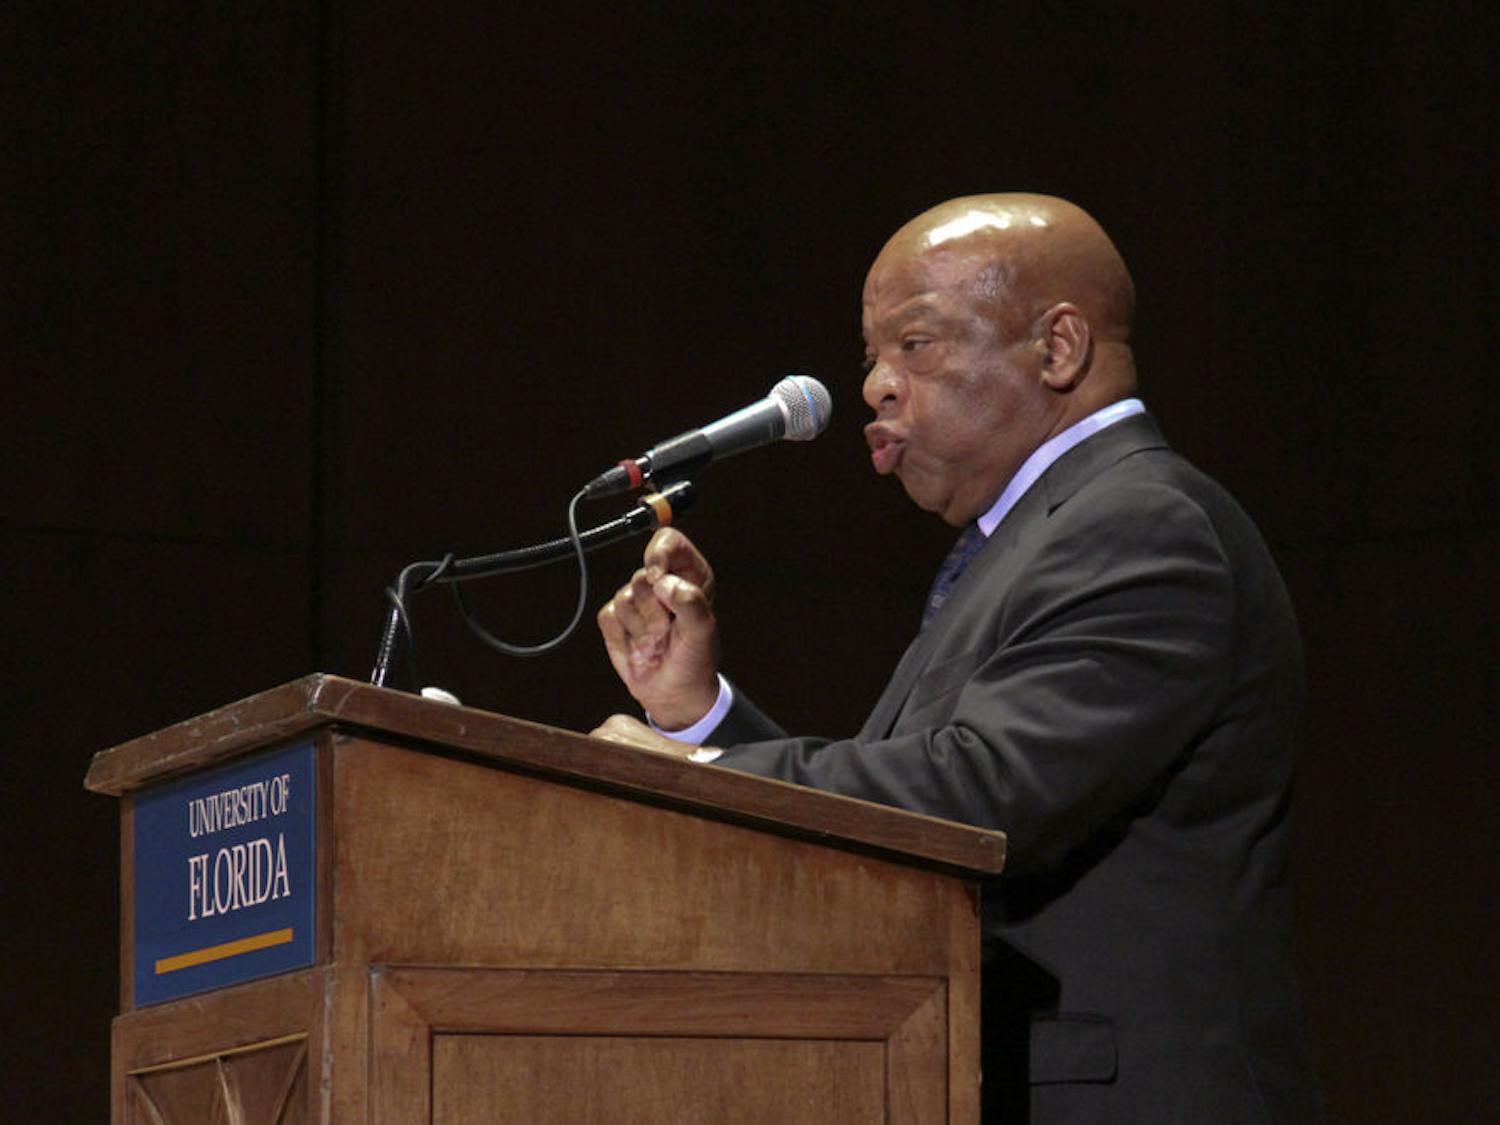 Civil rights activist and U.S. Representative John Lewis (D-Ga) speaks in the University Auditorium to celebrate the 50th Anniversary of the Voting Rights Act on Oct. 16, 2015. "Voting is the most sacred tool of nonviolence, and it must be used," he said.